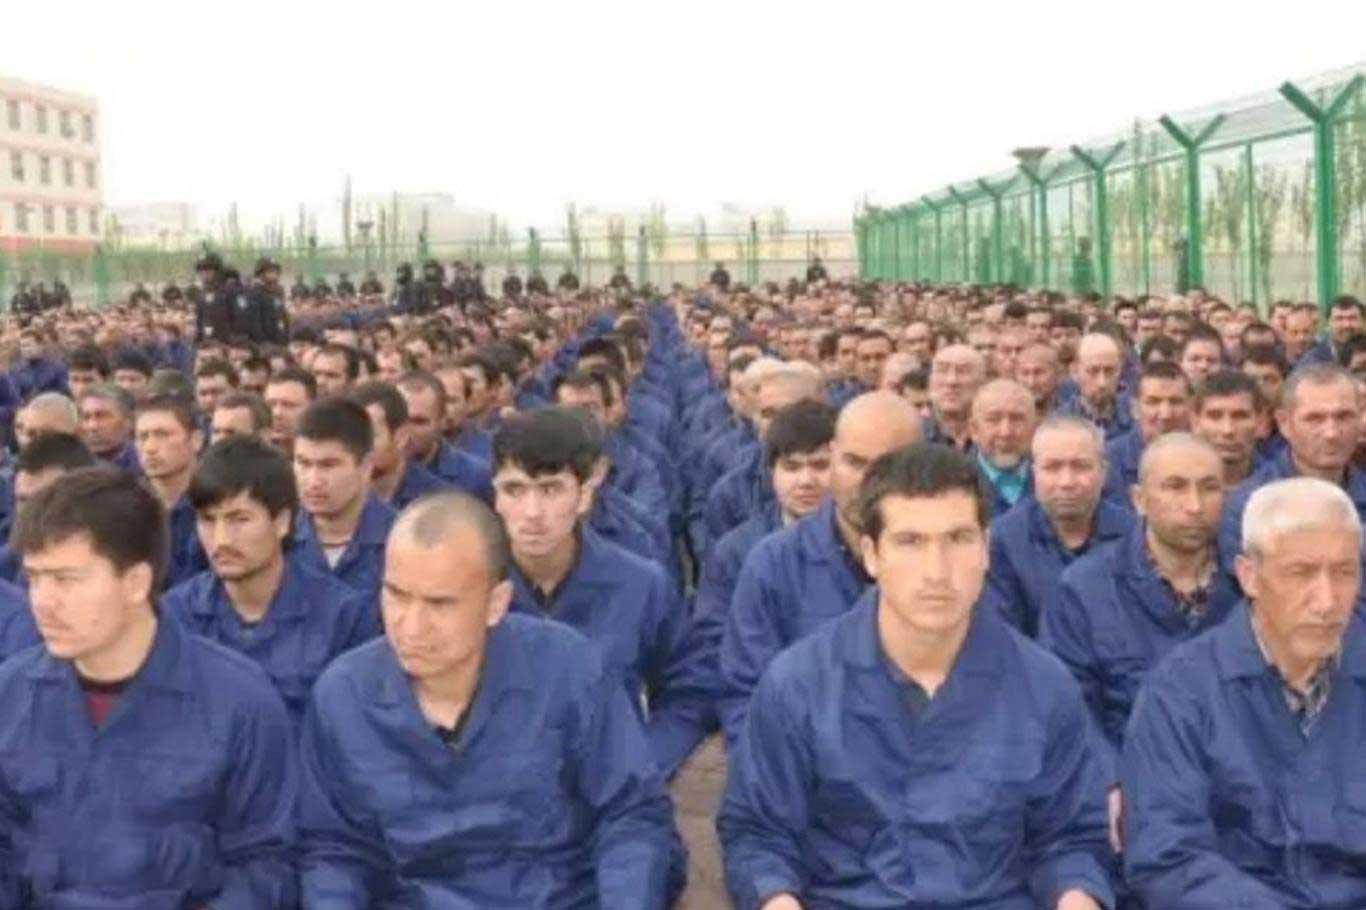 China obliterates documents on human rights abuses against Uyghurs